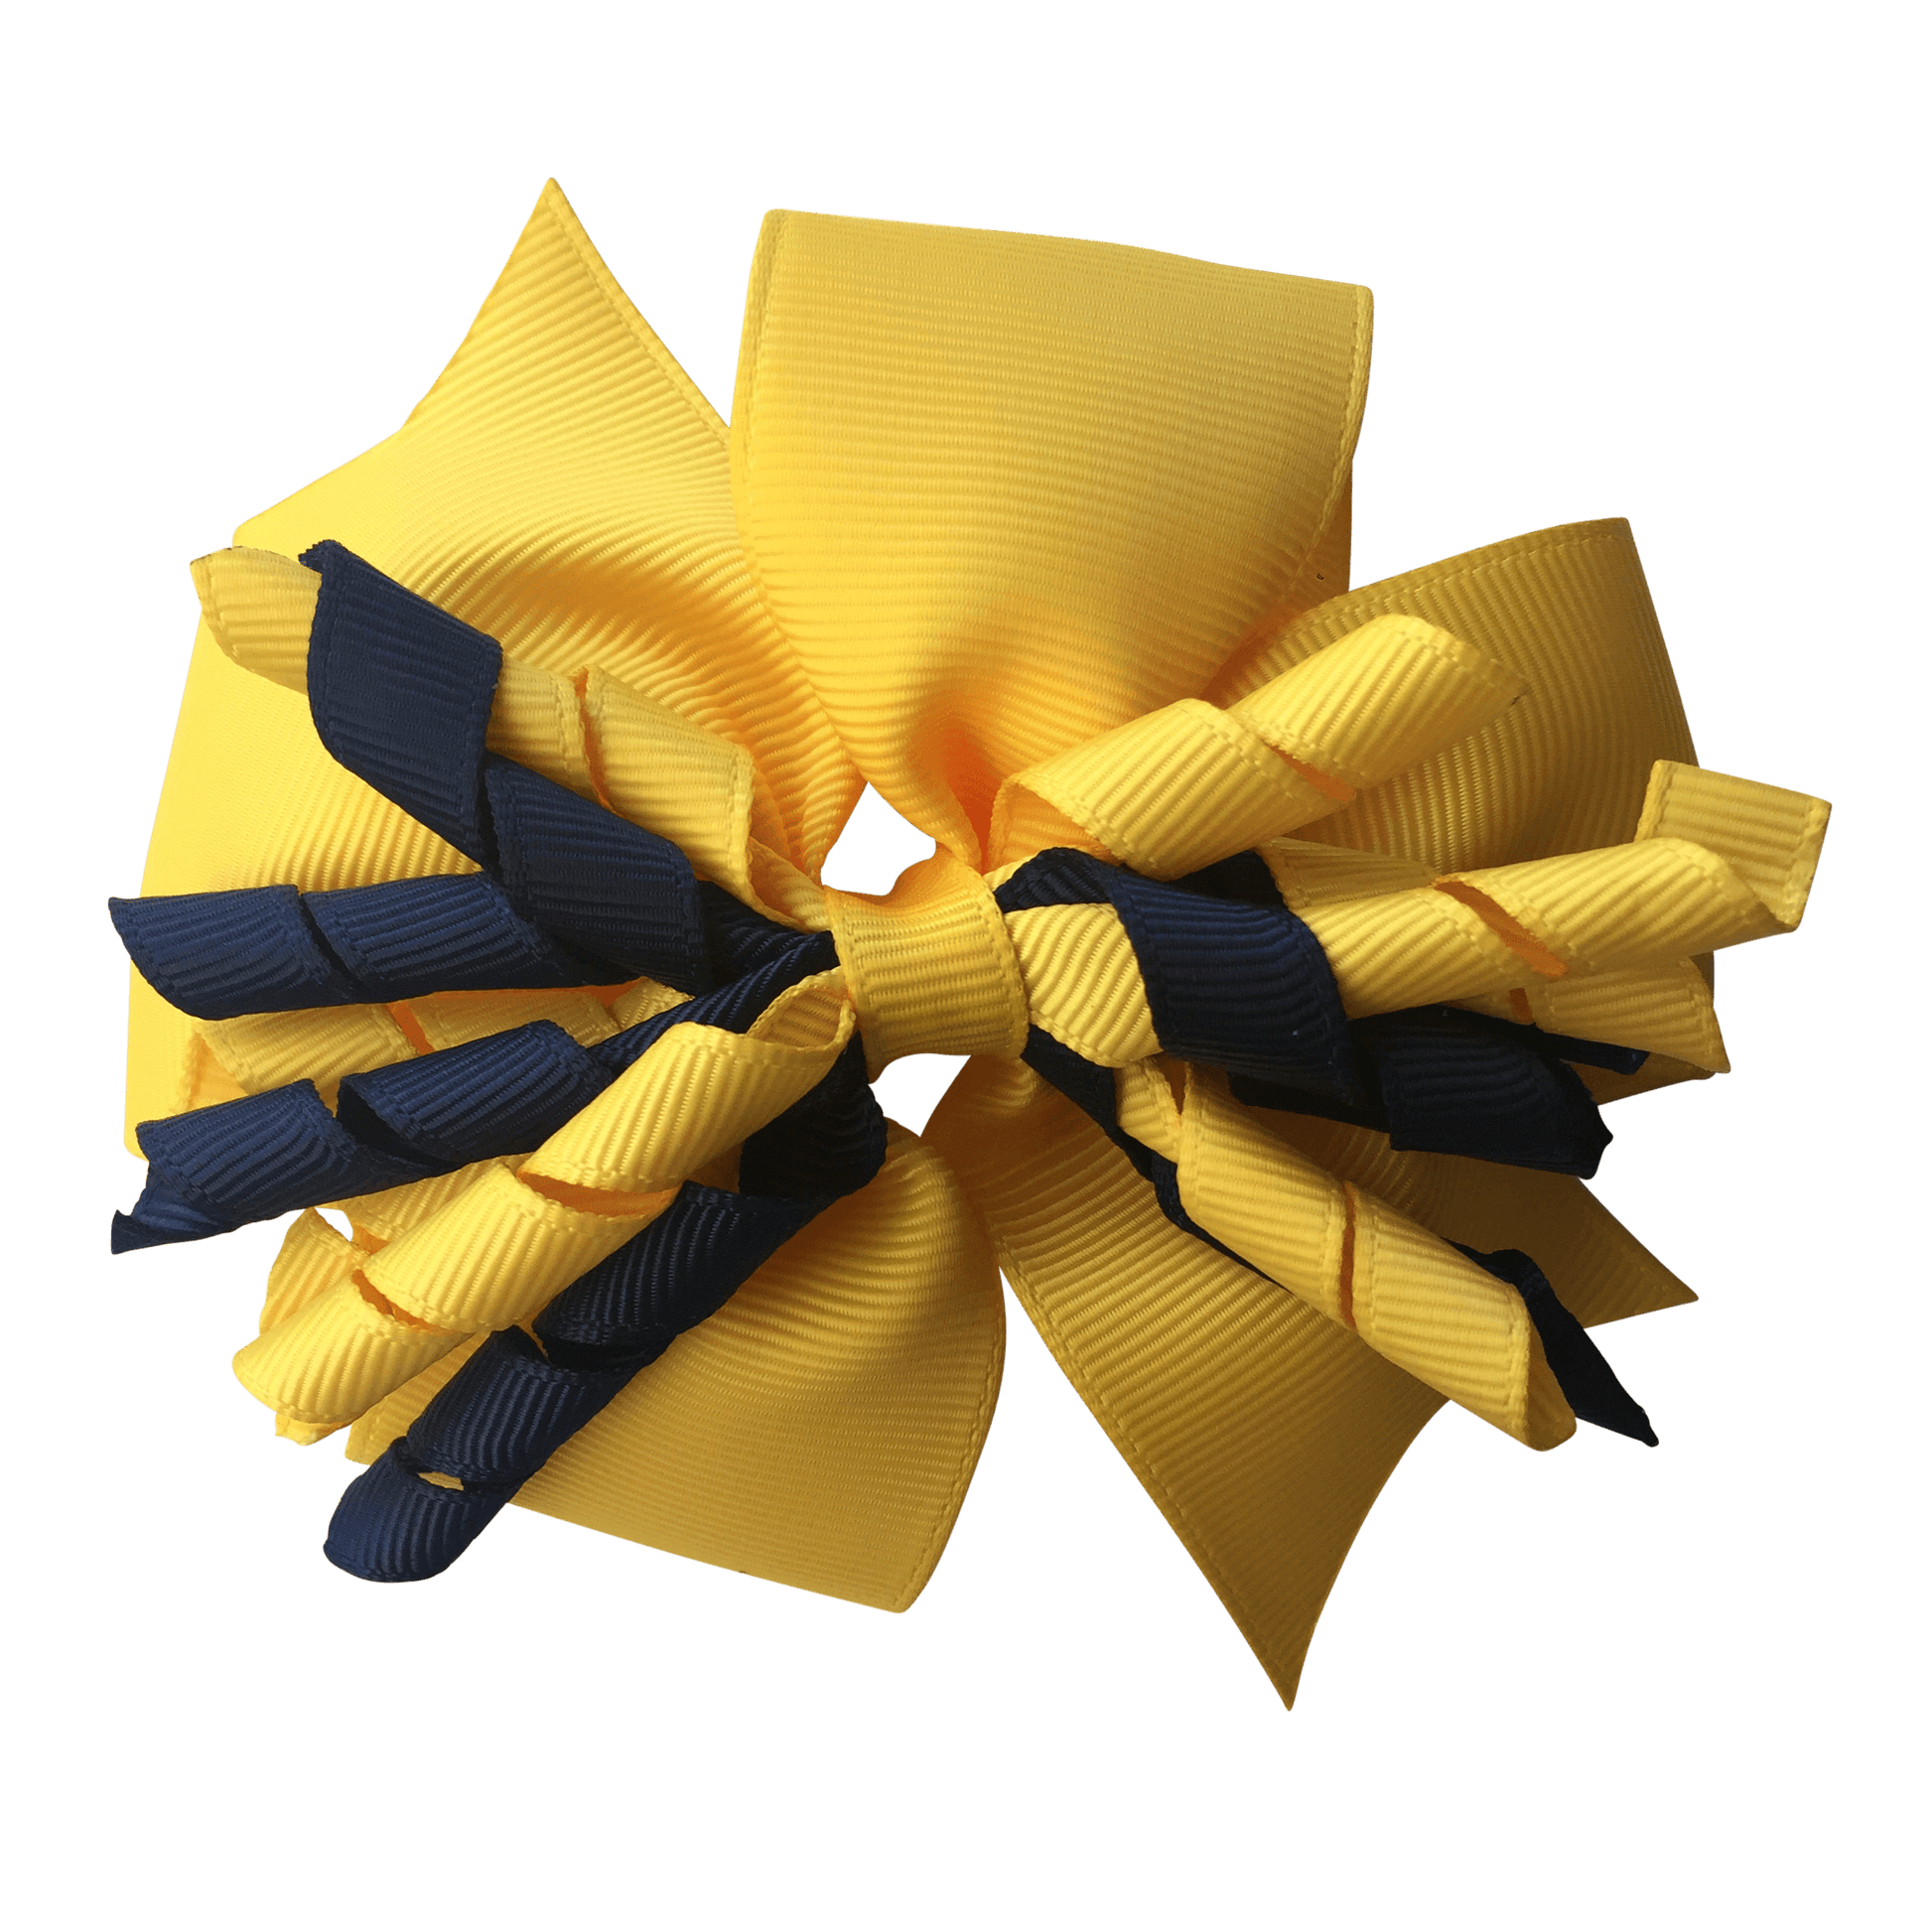 Yellow & Navy Hair Accessories - Ponytails and Fairytales